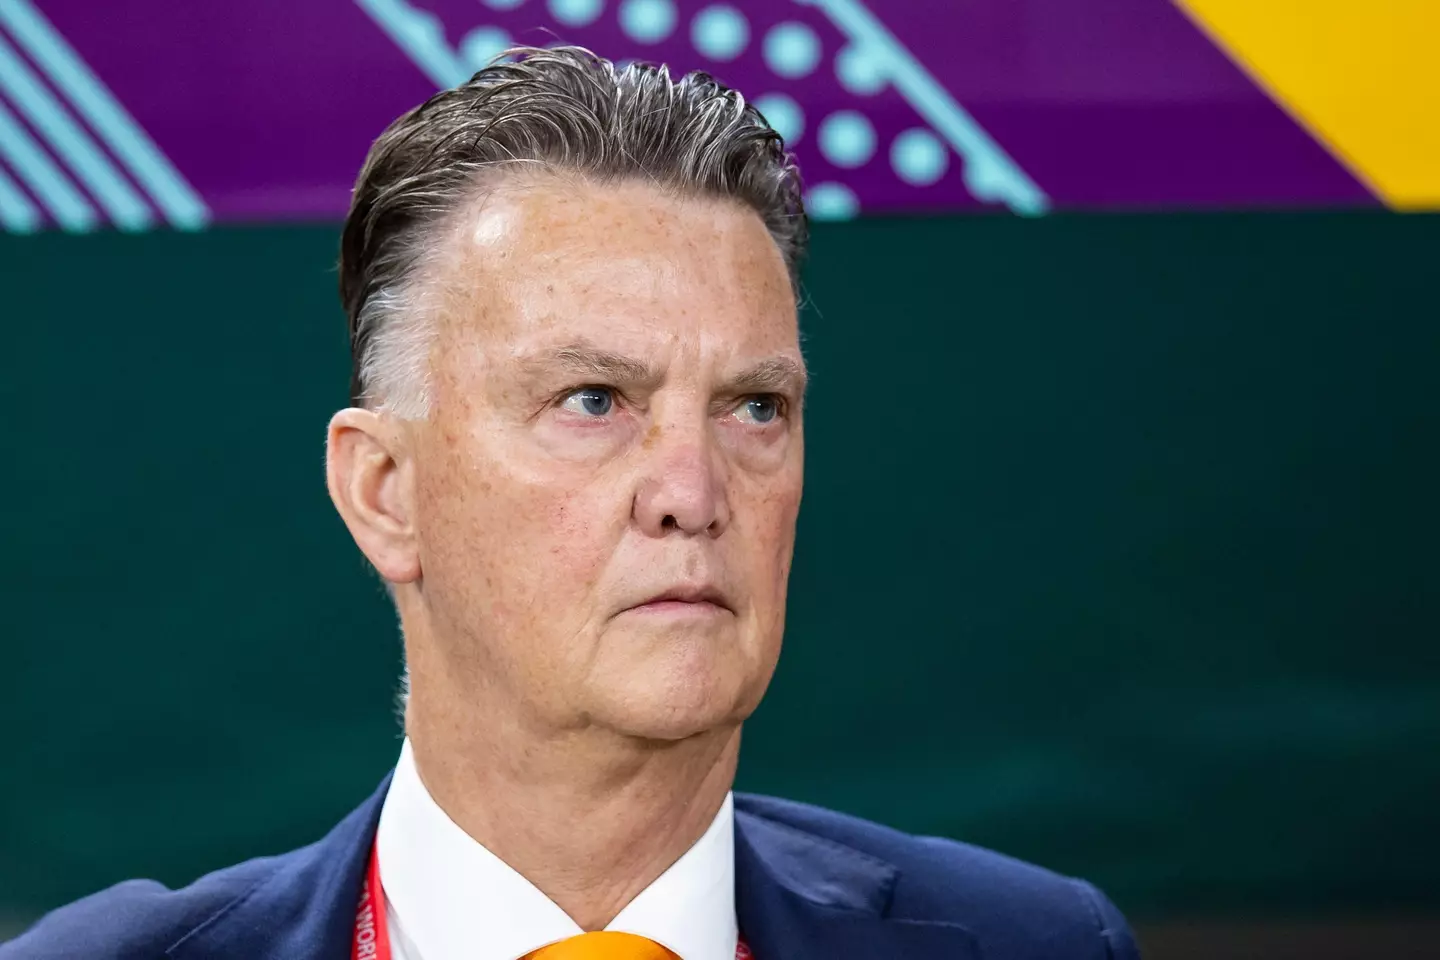 Louis van Gaal is looking to lead the Netherlands to World Cup glory.